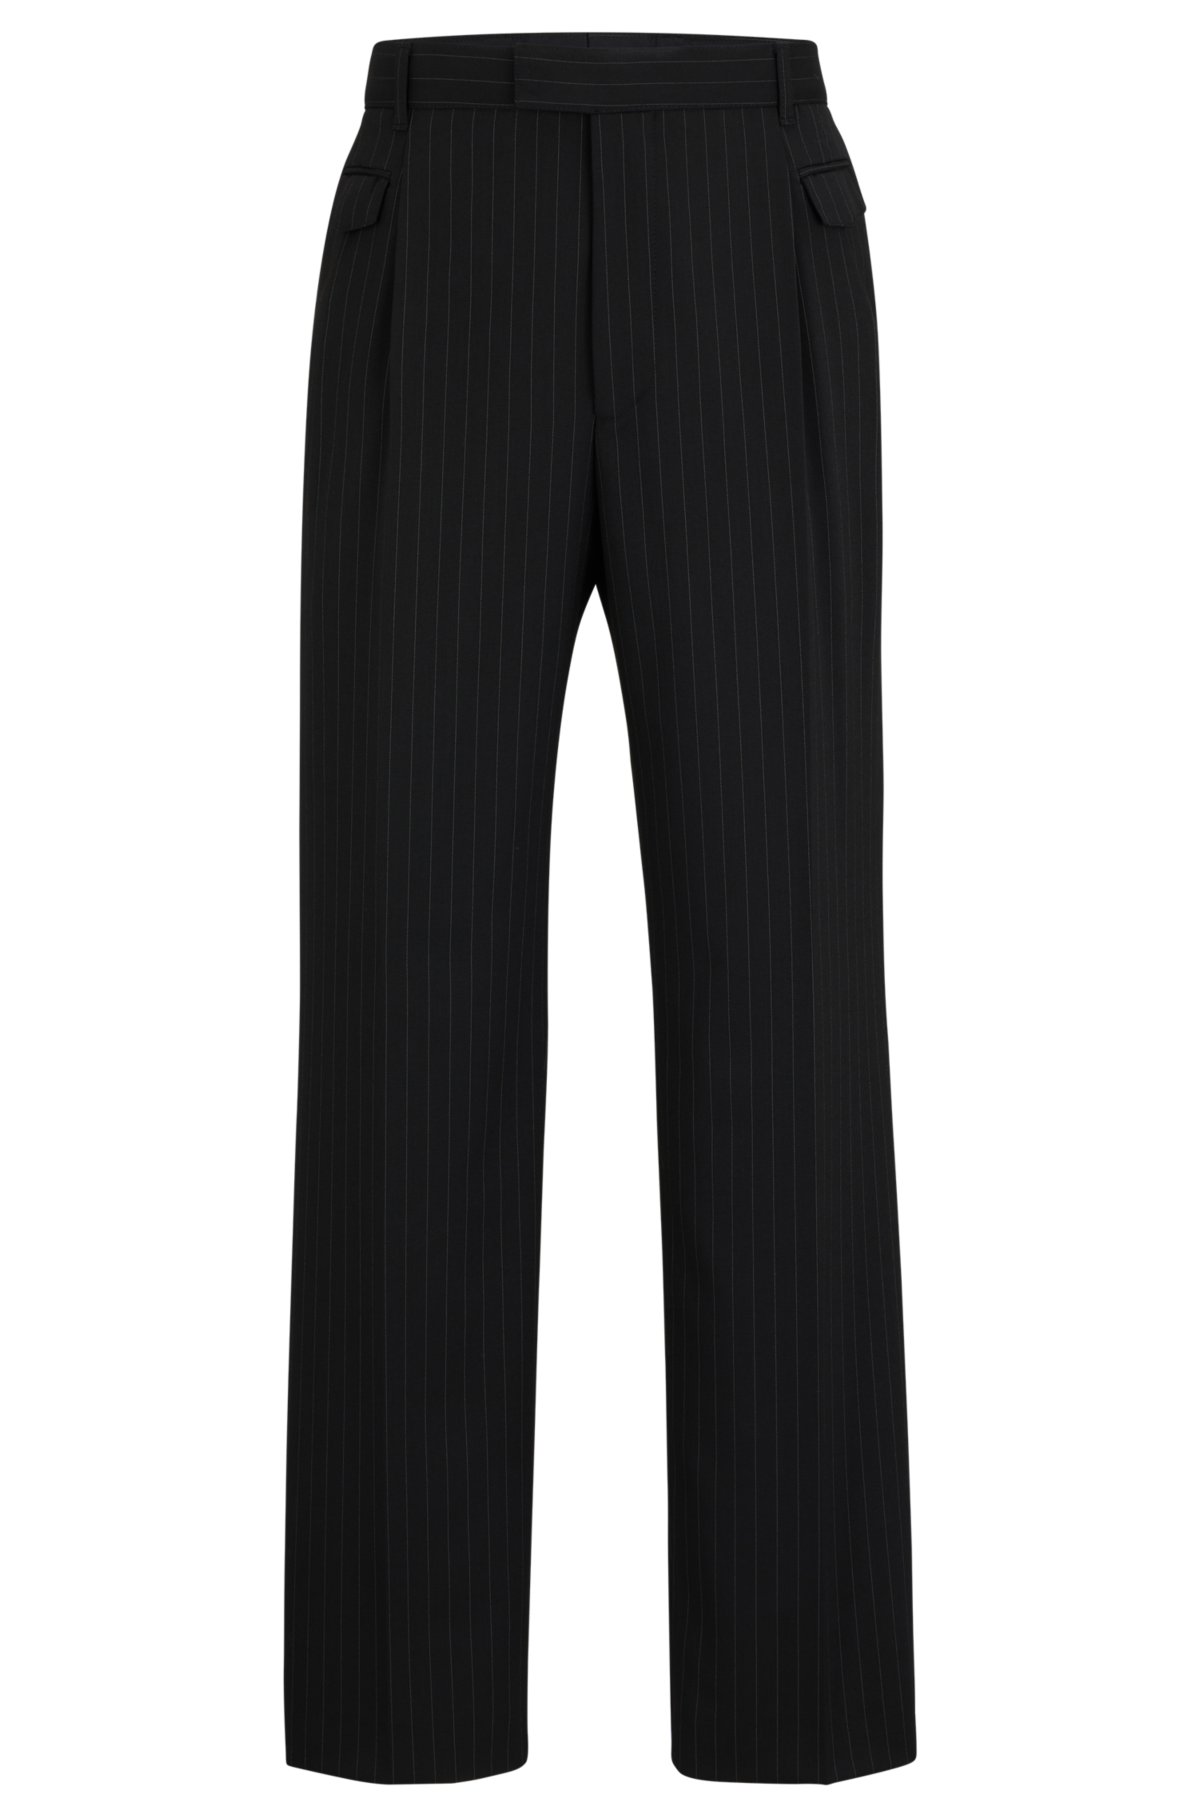 BOSS - Pinstriped straight-leg trousers in a wool blend